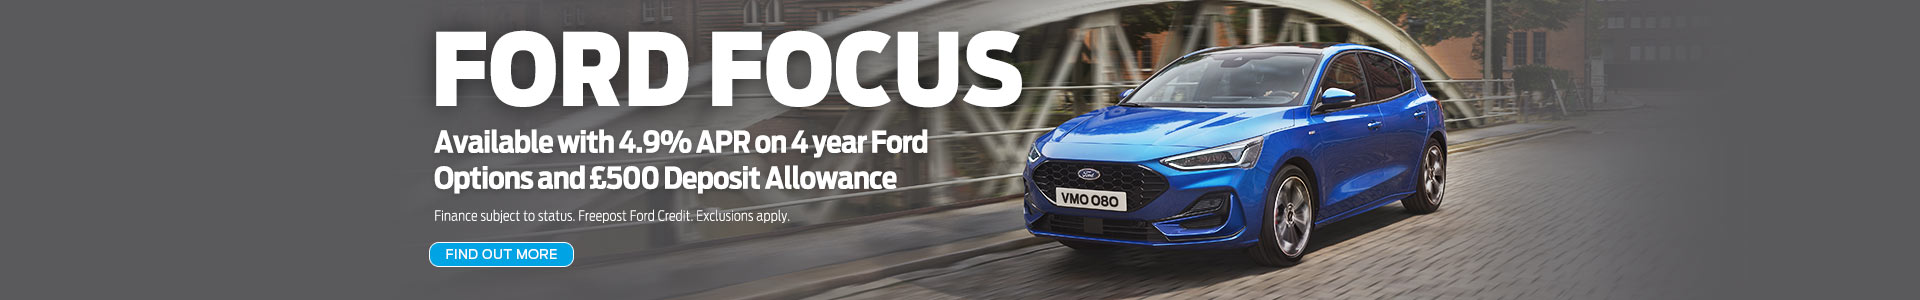 New Ford Focus - Find out more